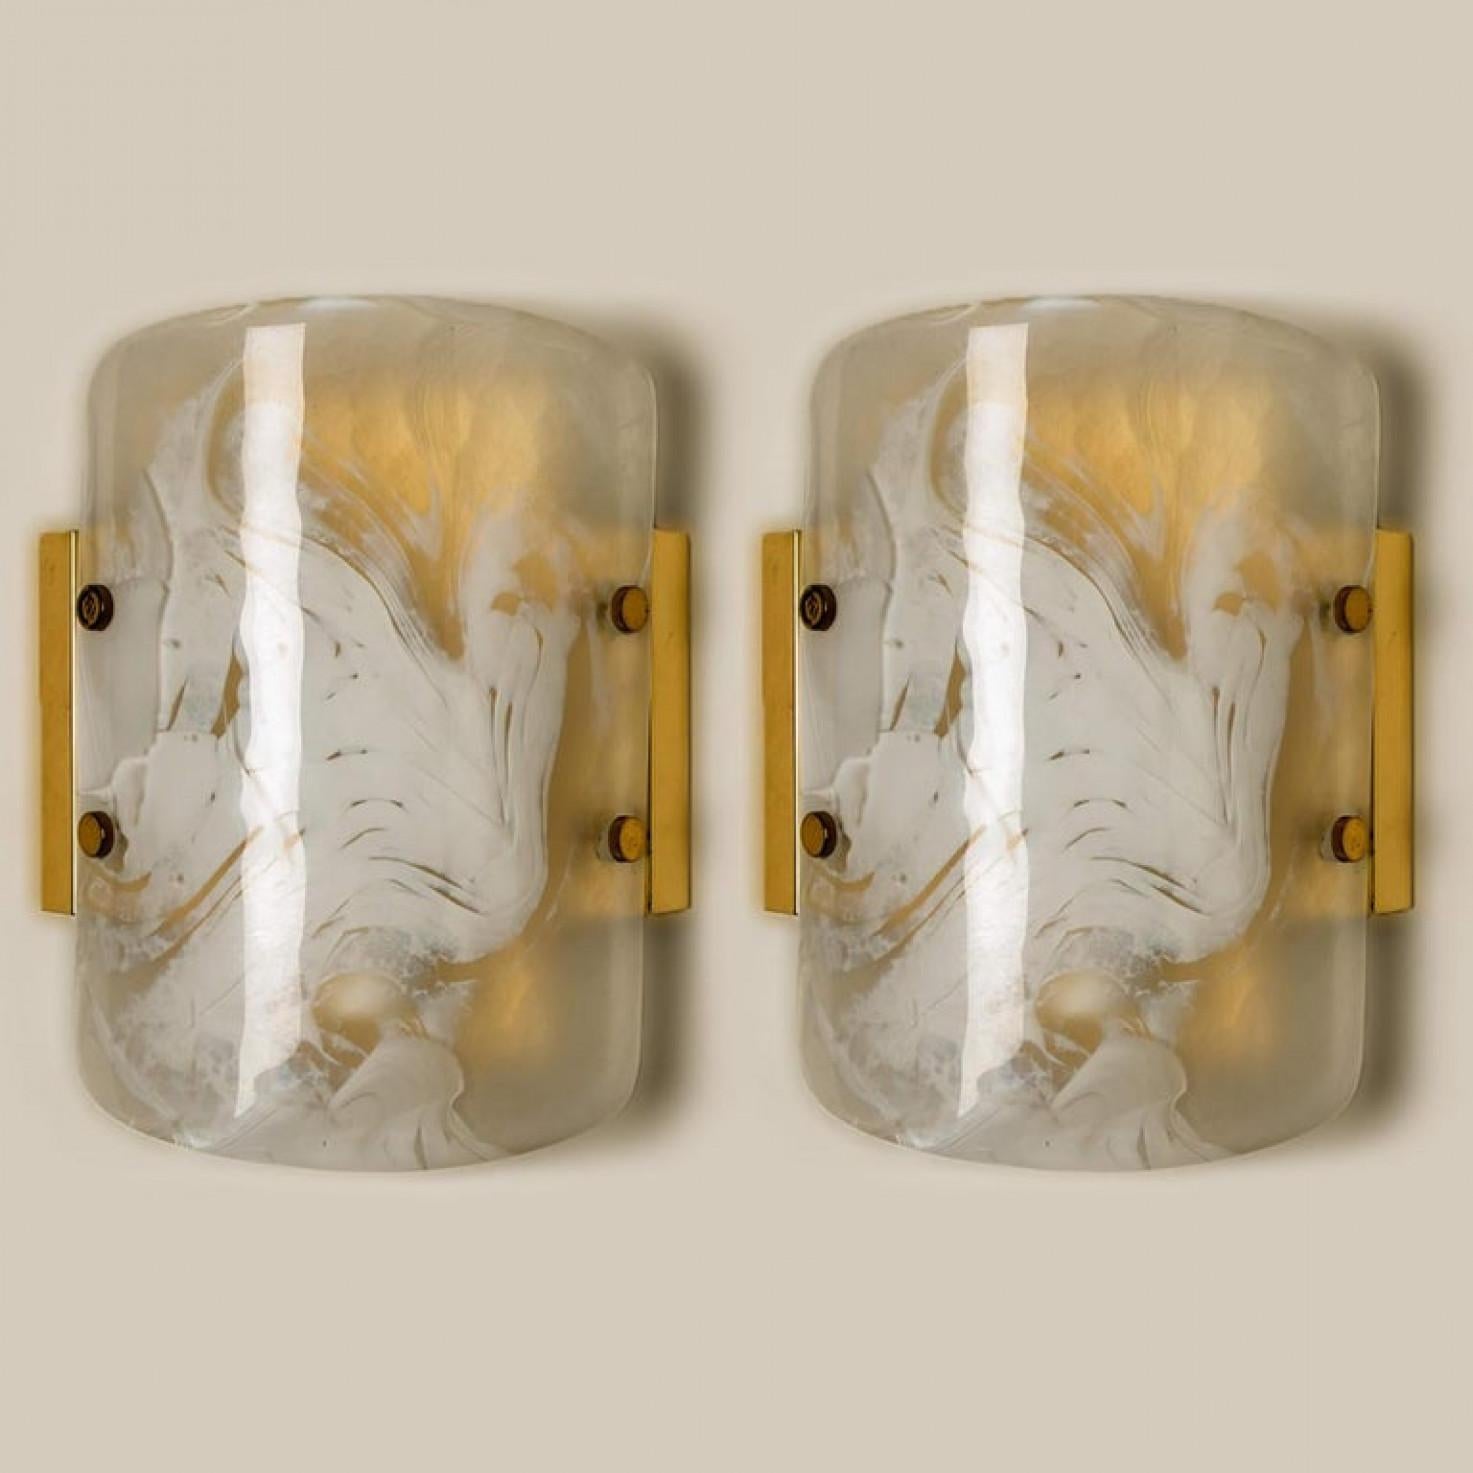 Pair of Glass Brass Wall Sconces by Hillebrand, Austria, 1960 For Sale 2